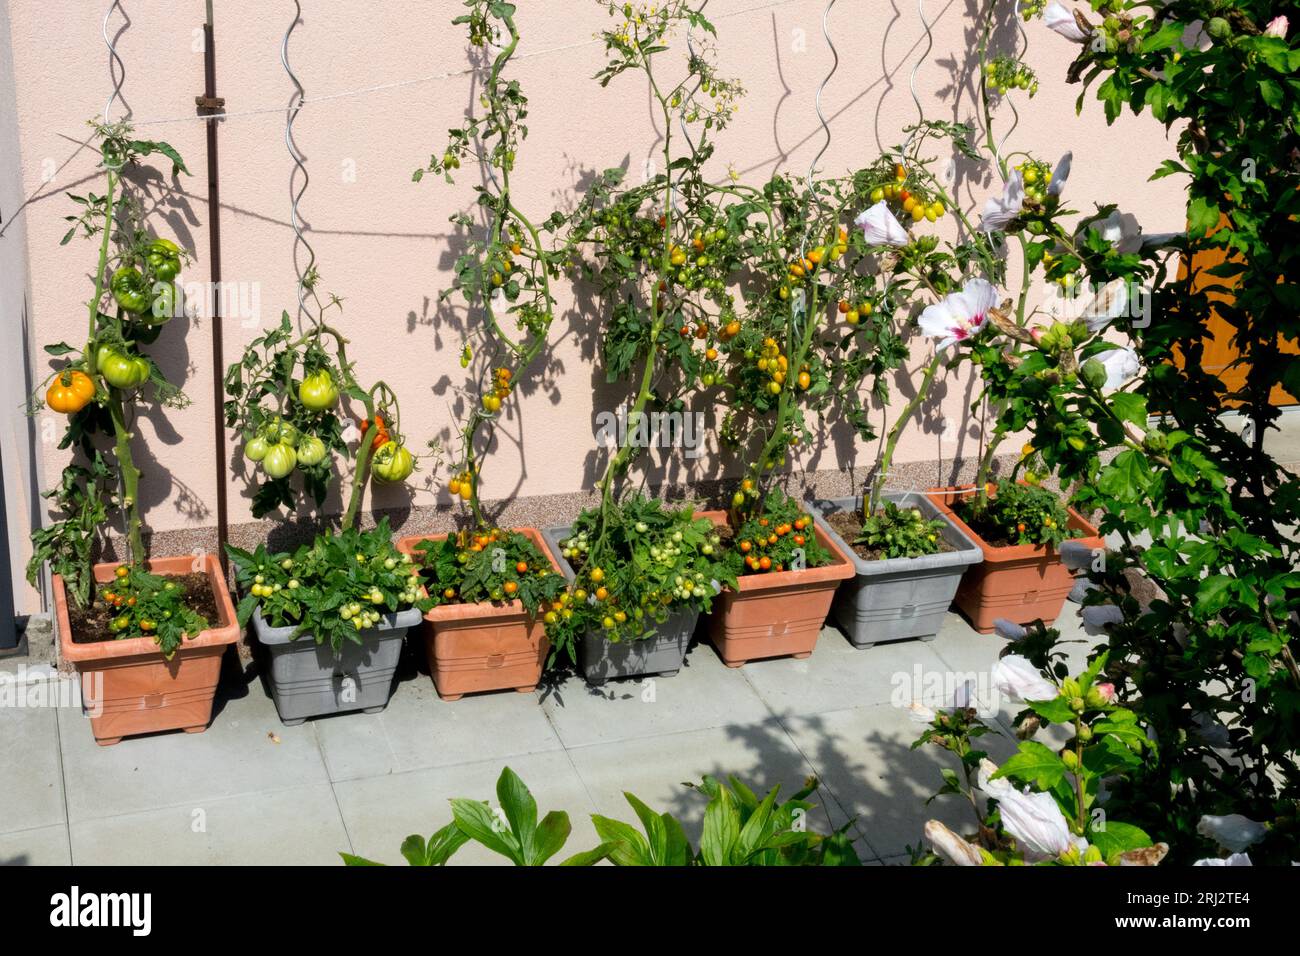 Tomatoes growing in pots, patio Stock Photo